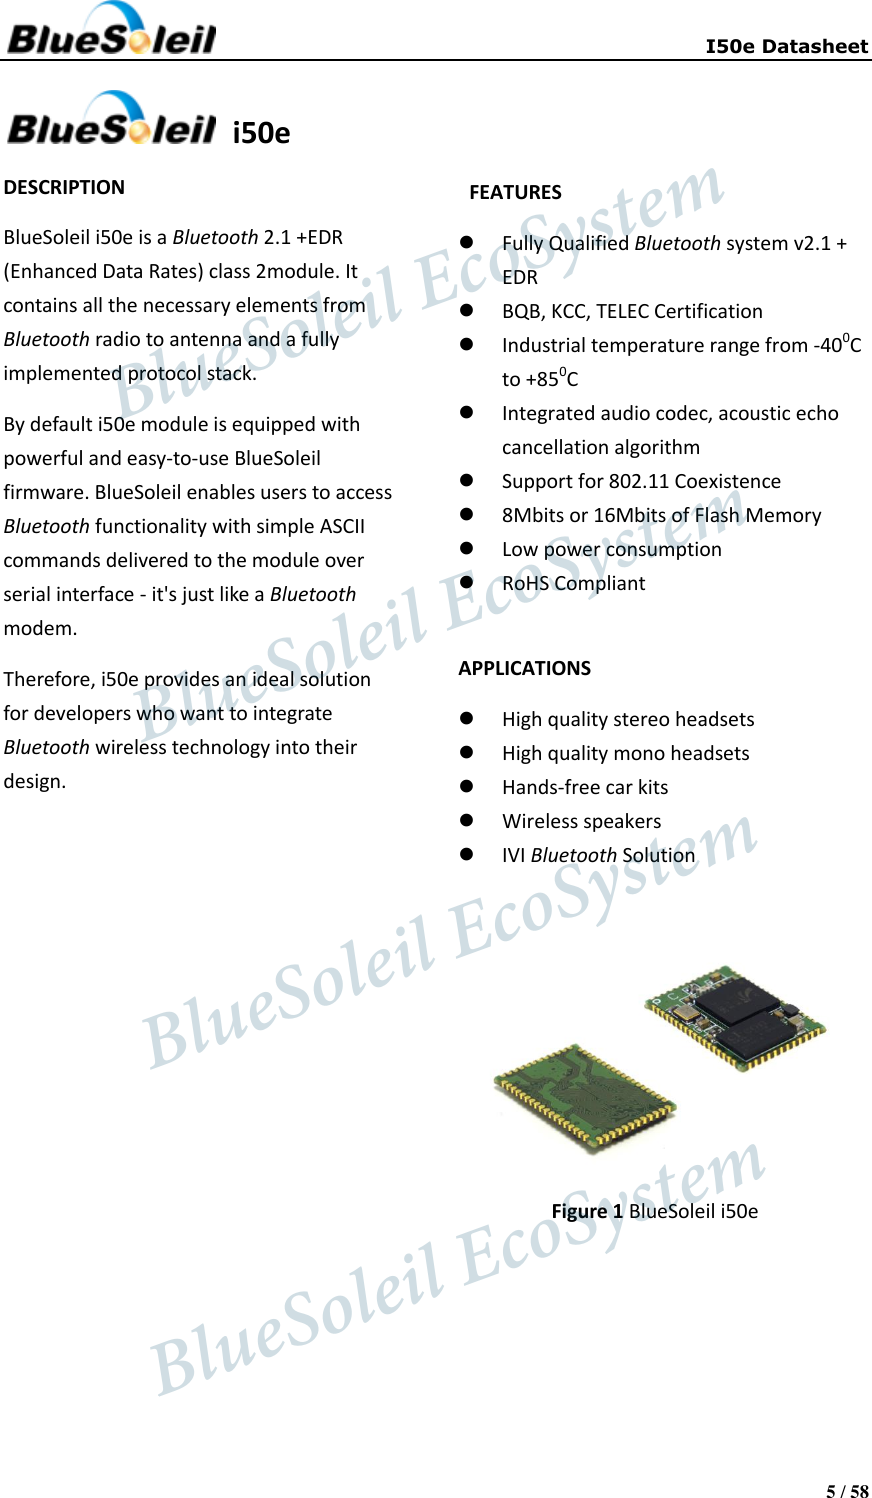     I50e Datasheet 5 / 58    i50e DESCRIPTION BlueSoleil i50e is a Bluetooth 2.1 +EDR (Enhanced Data Rates) class 2module. It contains all the necessary elements from Bluetooth radio to antenna and a fully implemented protocol stack. By default i50e module is equipped with powerful and easy-to-use BlueSoleil firmware. BlueSoleil enables users to access Bluetooth functionality with simple ASCII commands delivered to the module over serial interface - it&apos;s just like a Bluetooth modem. Therefore, i50e provides an ideal solution for developers who want to integrate Bluetooth wireless technology into their design.                  FEATURES  Fully Qualified Bluetooth system v2.1 + EDR  BQB, KCC, TELEC Certification  Industrial temperature range from -400C to +850C  Integrated audio codec, acoustic echo cancellation algorithm  Support for 802.11 Coexistence  8Mbits or 16Mbits of Flash Memory  Low power consumption  RoHS Compliant  APPLICATIONS  High quality stereo headsets  High quality mono headsets  Hands-free car kits  Wireless speakers  IVI Bluetooth Solution   Figure 1 BlueSoleil i50e                   BlueSoleil EcoSystem            BlueSoleil EcoSystem      BlueSoleil EcoSystemBlueSoleil EcoSystem